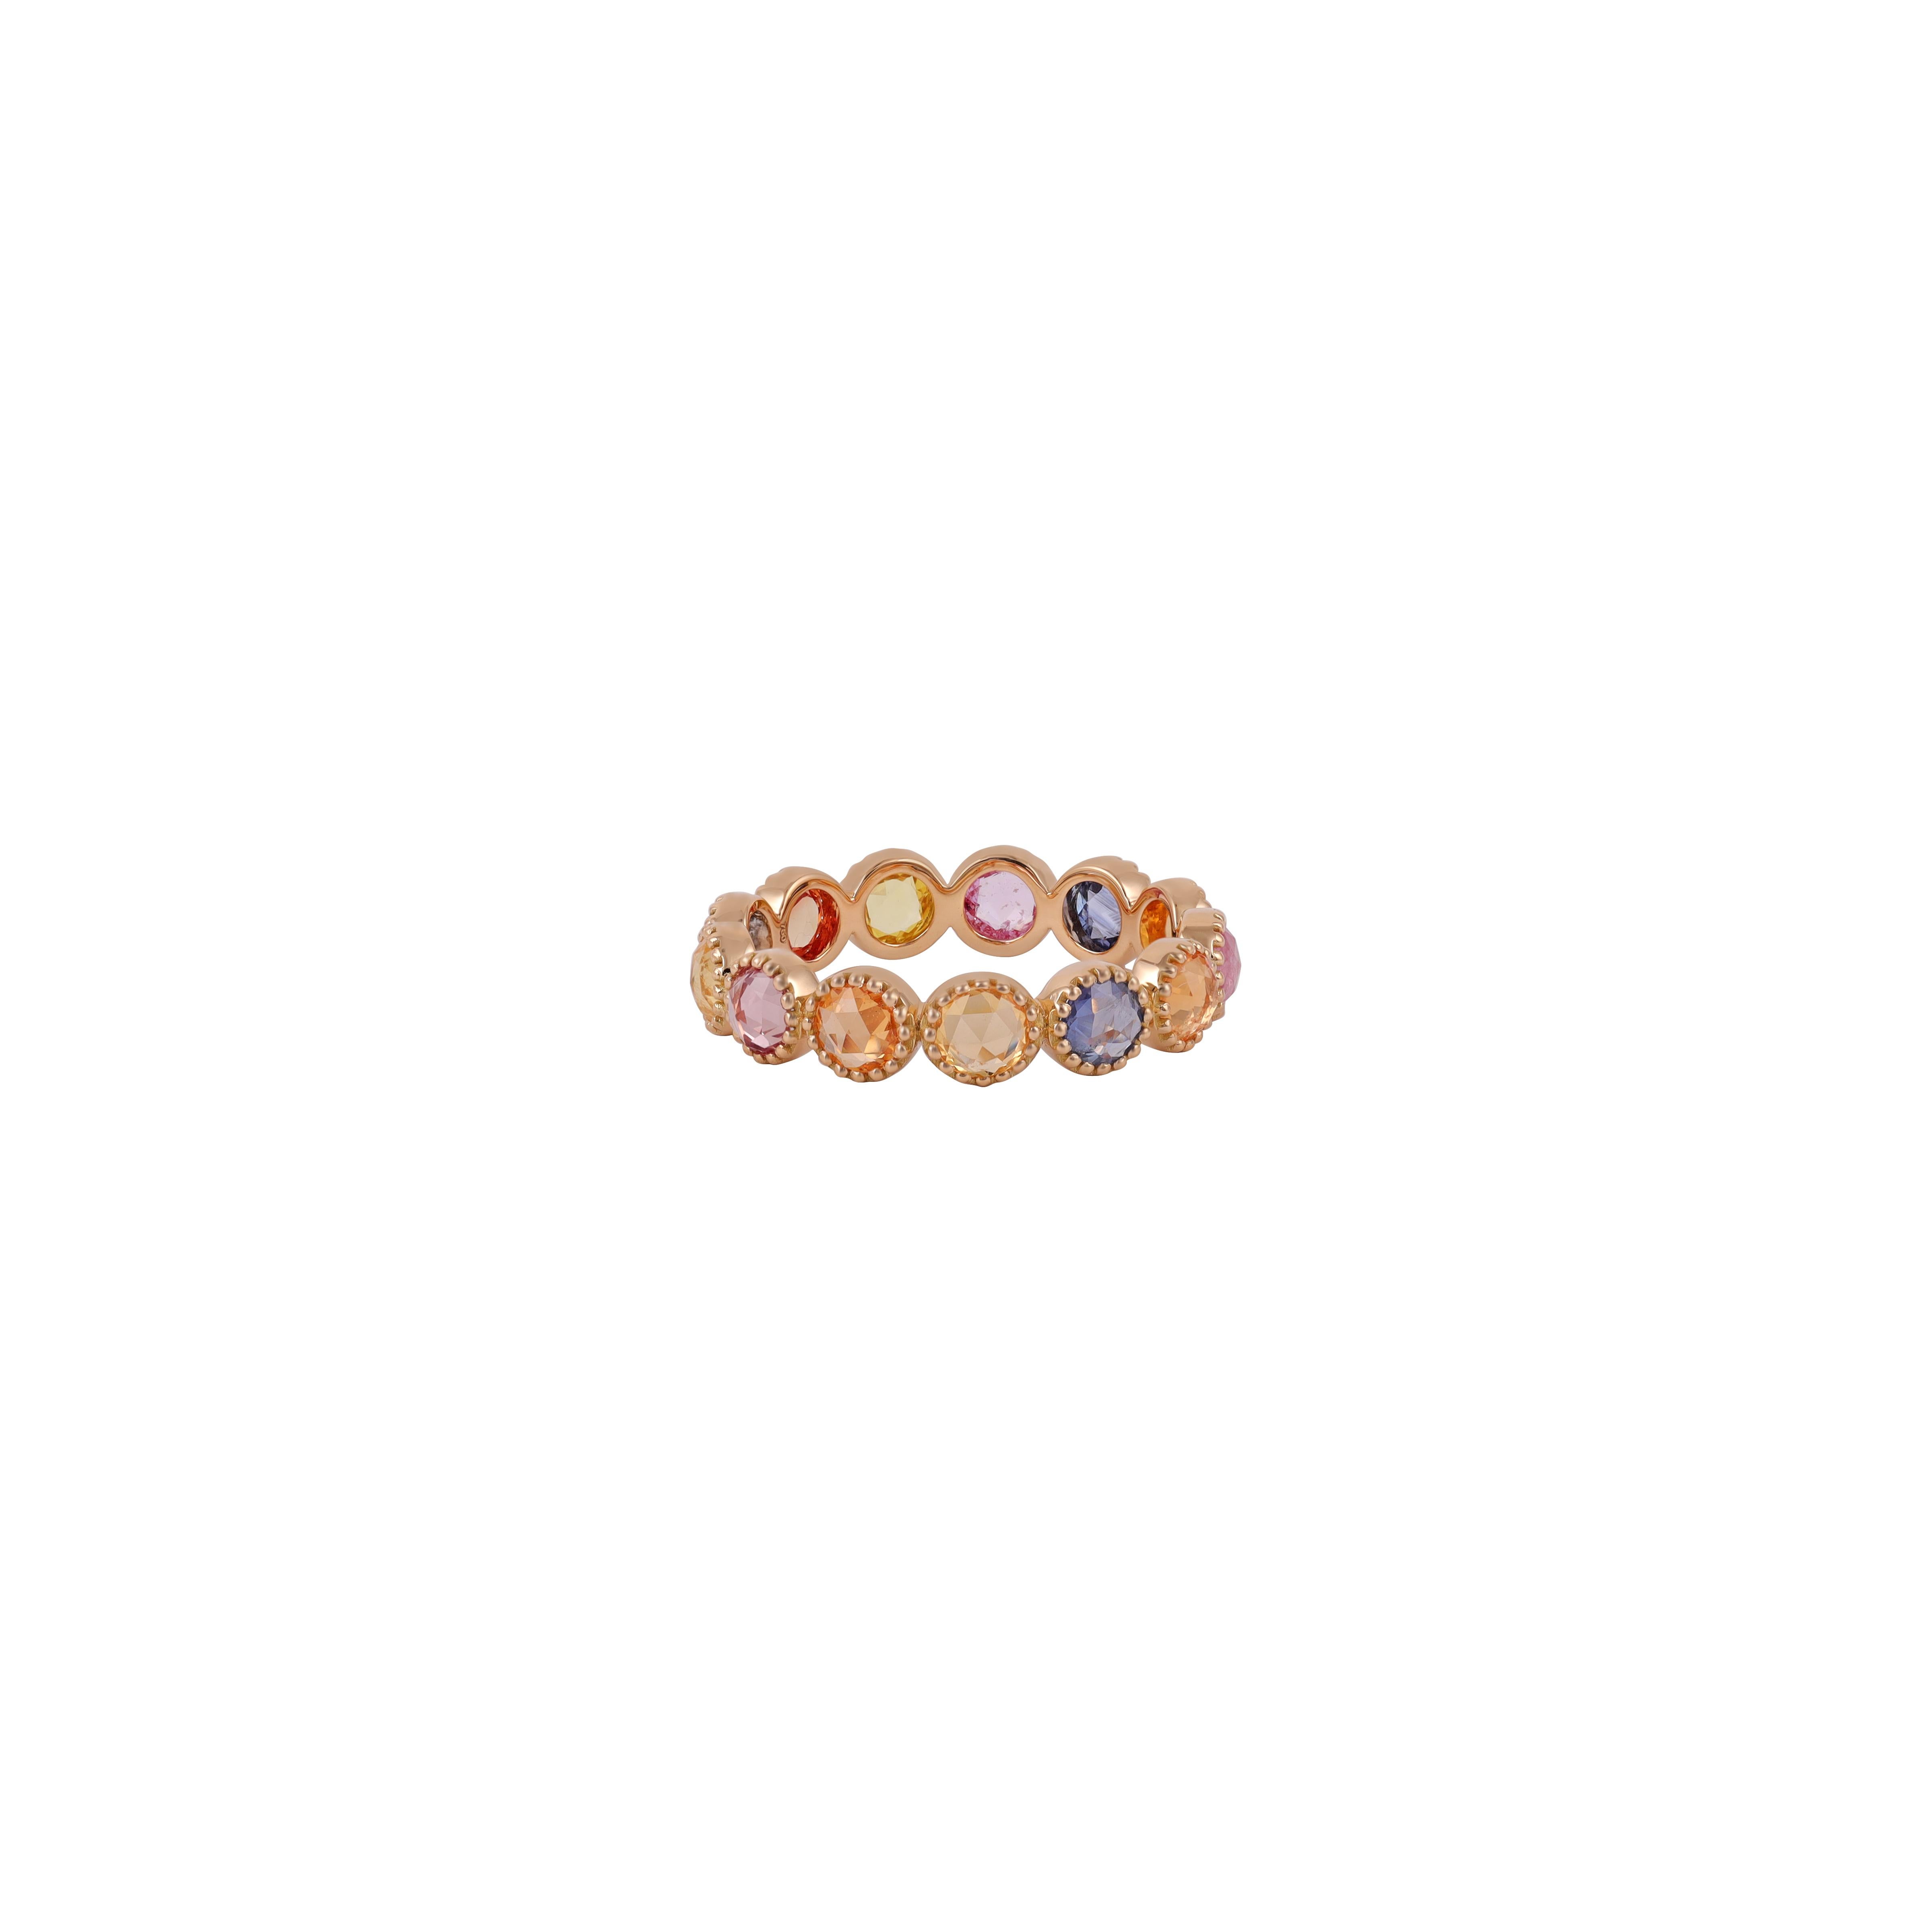 Handcrafted Round Sapphire Band
13 Round Sapphire - 2.83 CTs
18 Karat yellow Gold - 2.64 Grams

Custom Services
Resizing is available.
Request Customization